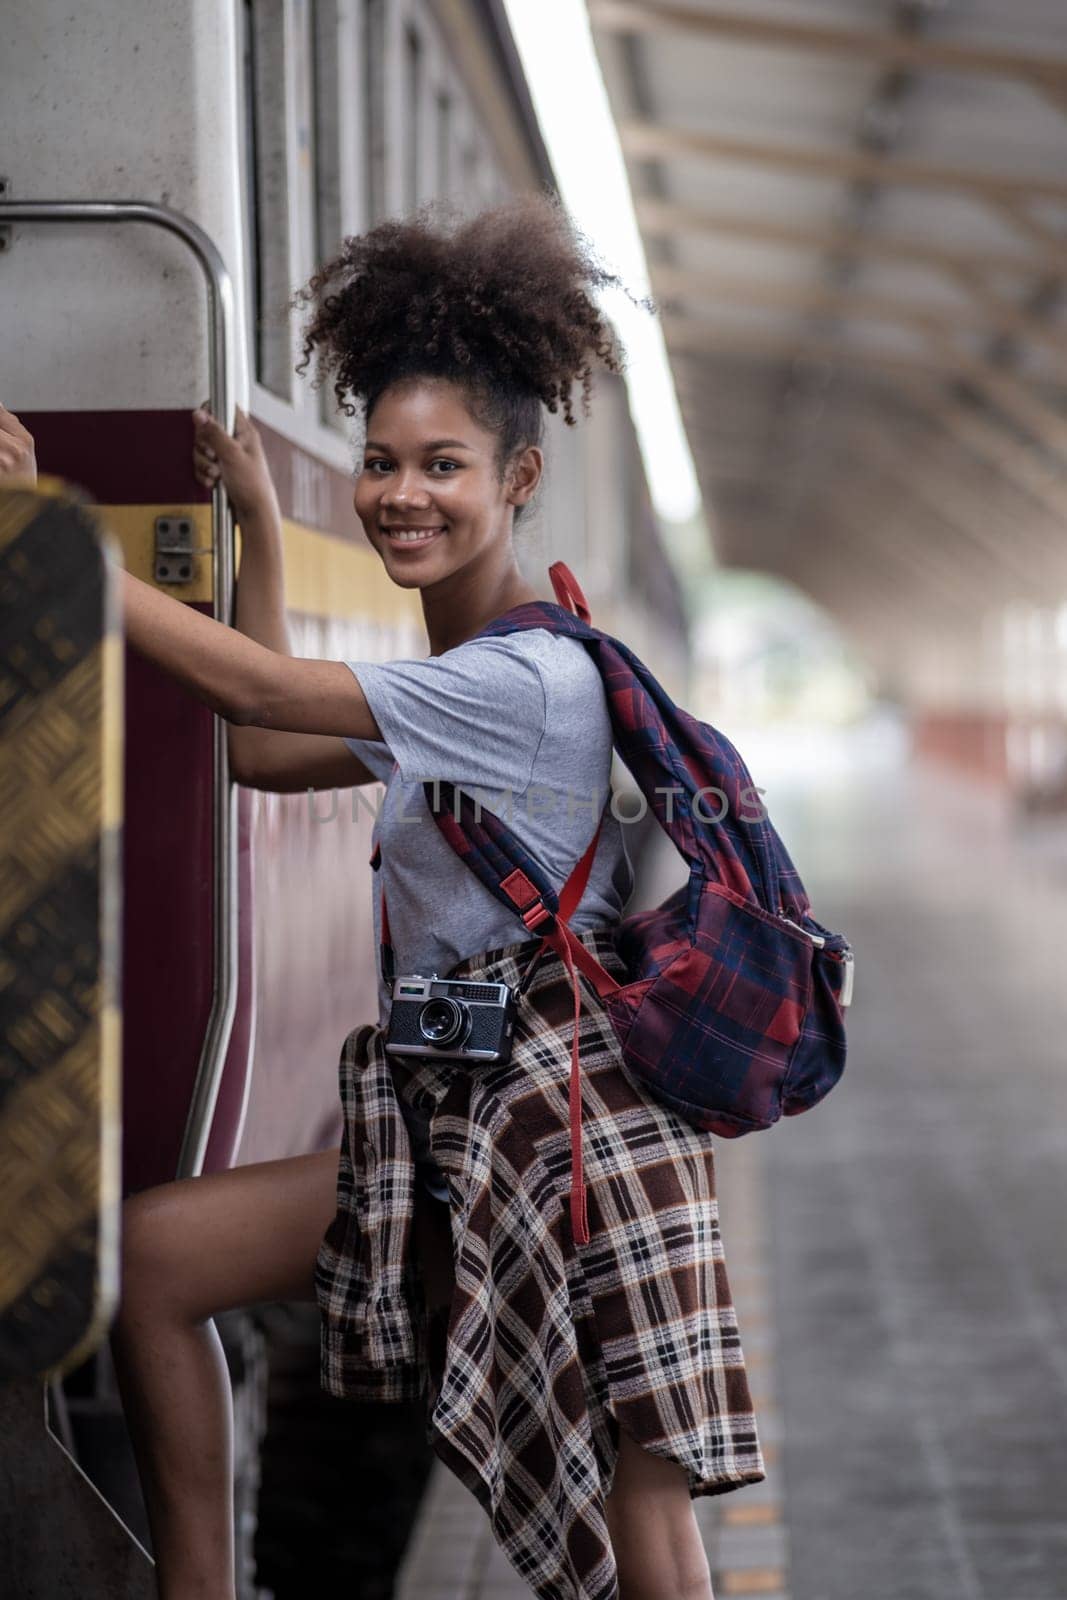 Traveler african asian american woman getting in a train to hop on train, Young woman female standing on train door by wuttichaicci